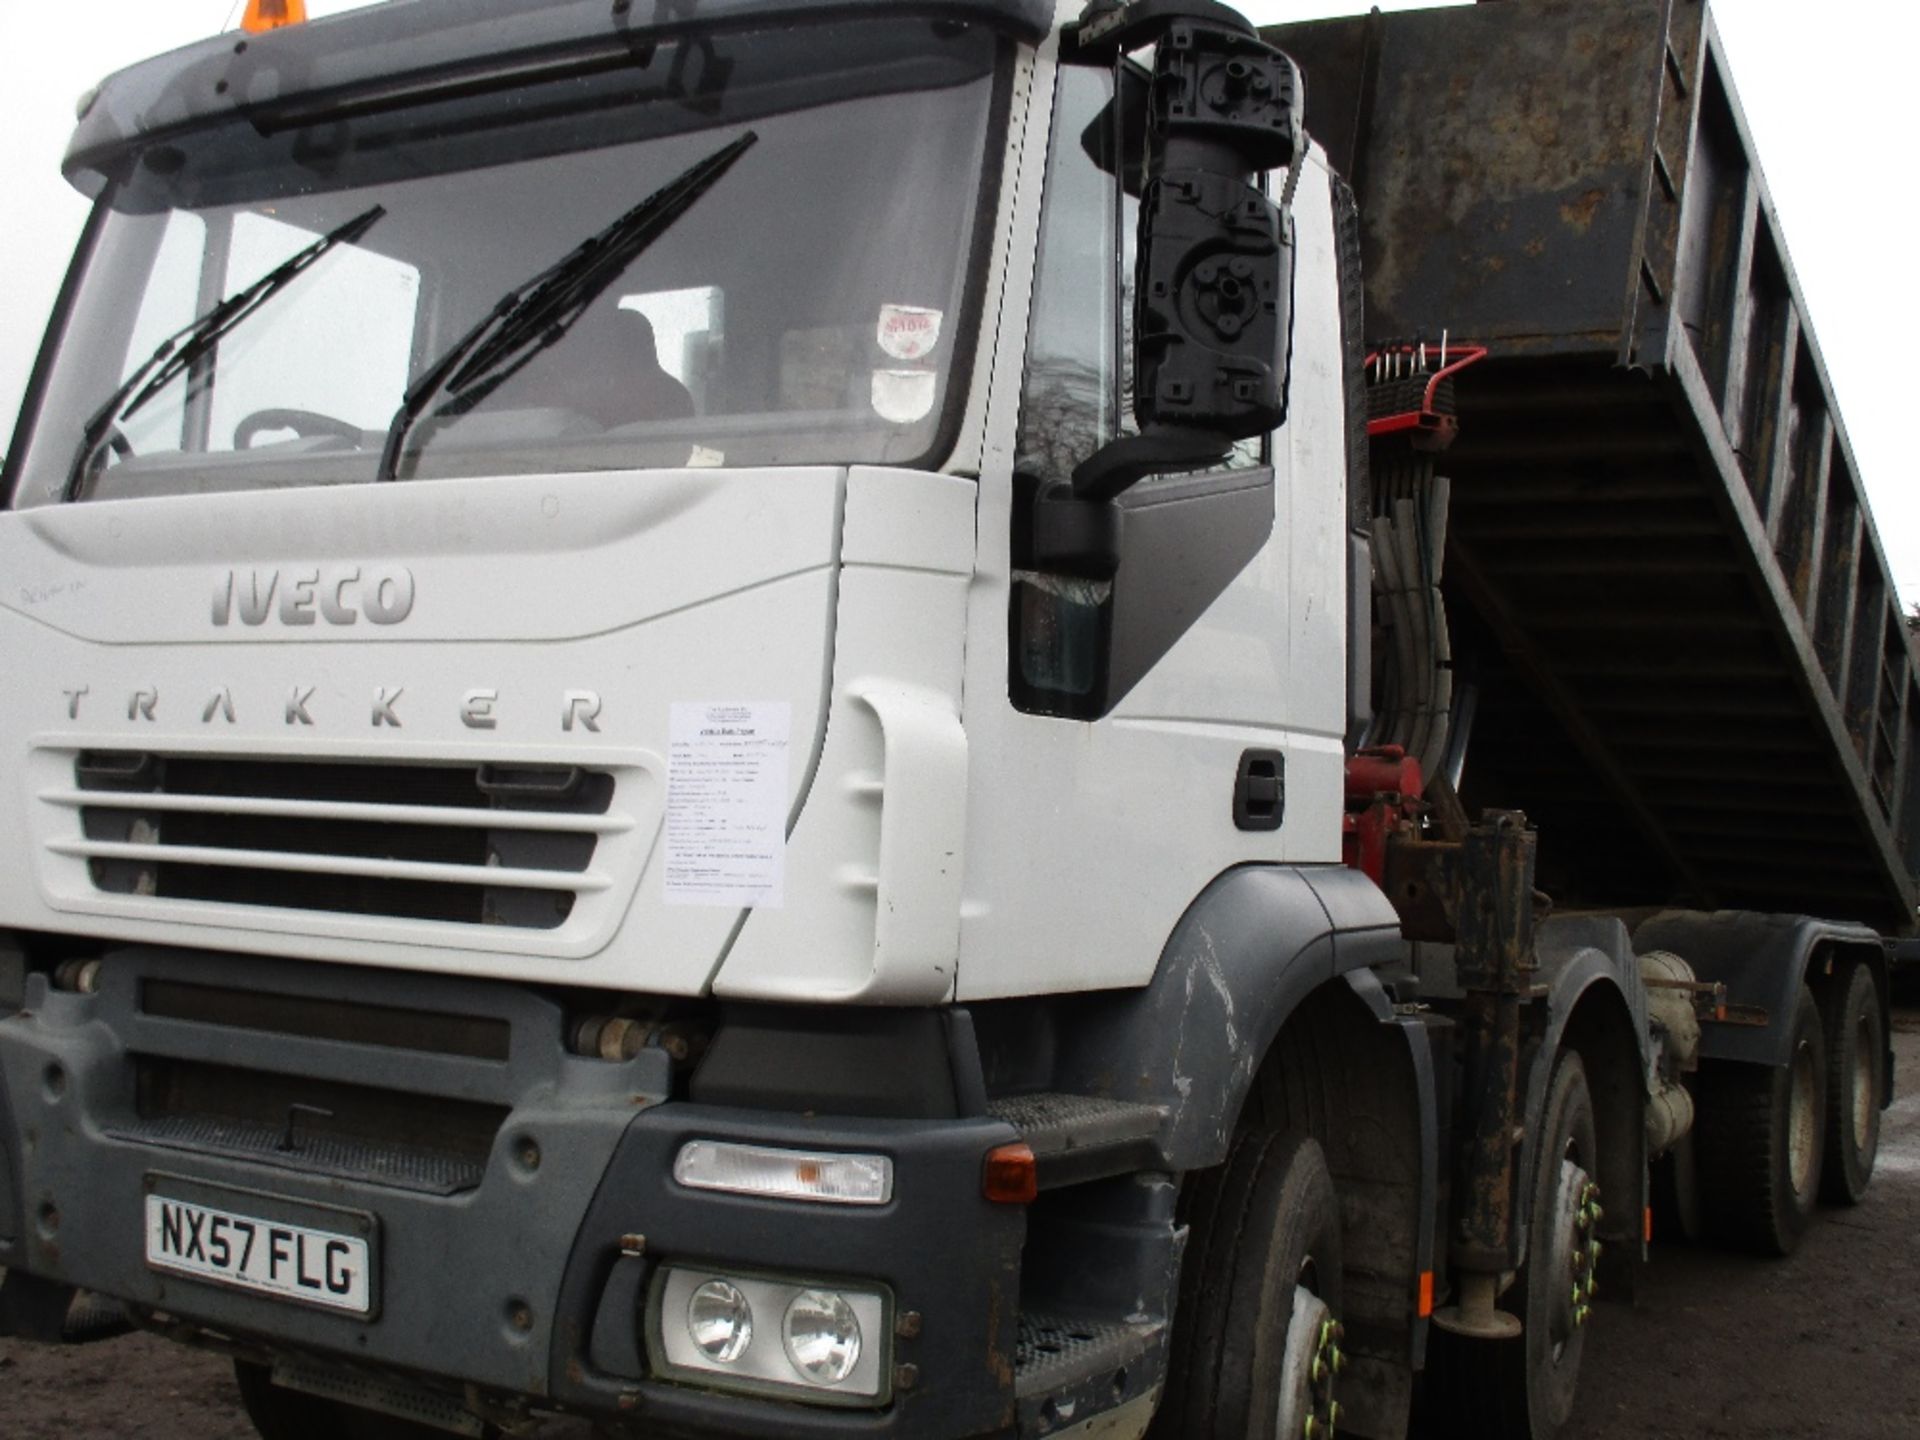 IVECO EUROTRAKER 8X4 TIPPER GRAB LORRY WITH HMF 1144 CRANE - Image 18 of 24